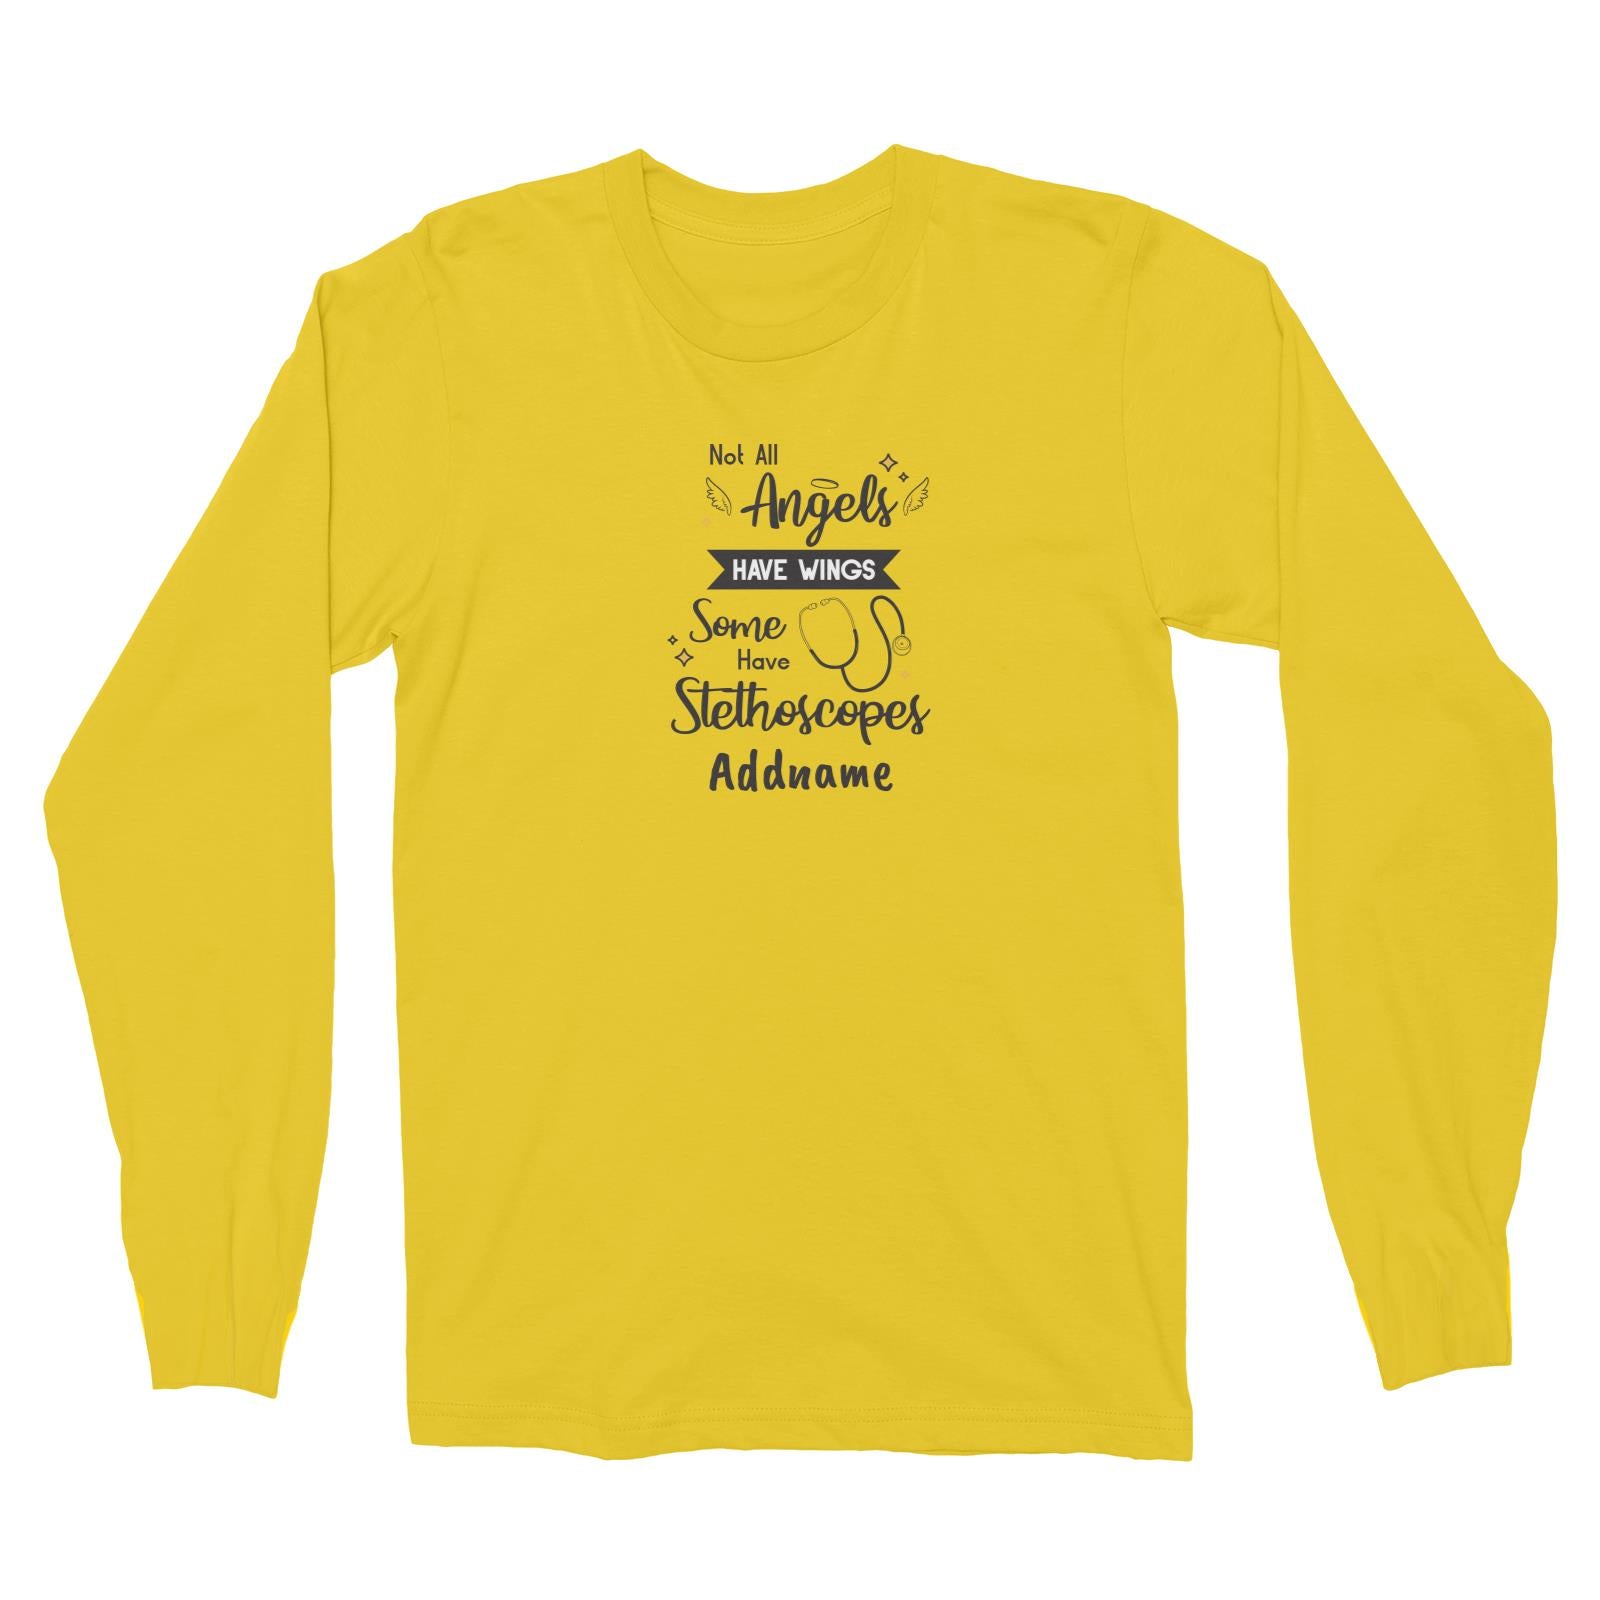 Not All Angels Have Wings, Some Have Stethoscopes Long Sleeve Unisex T-Shirt